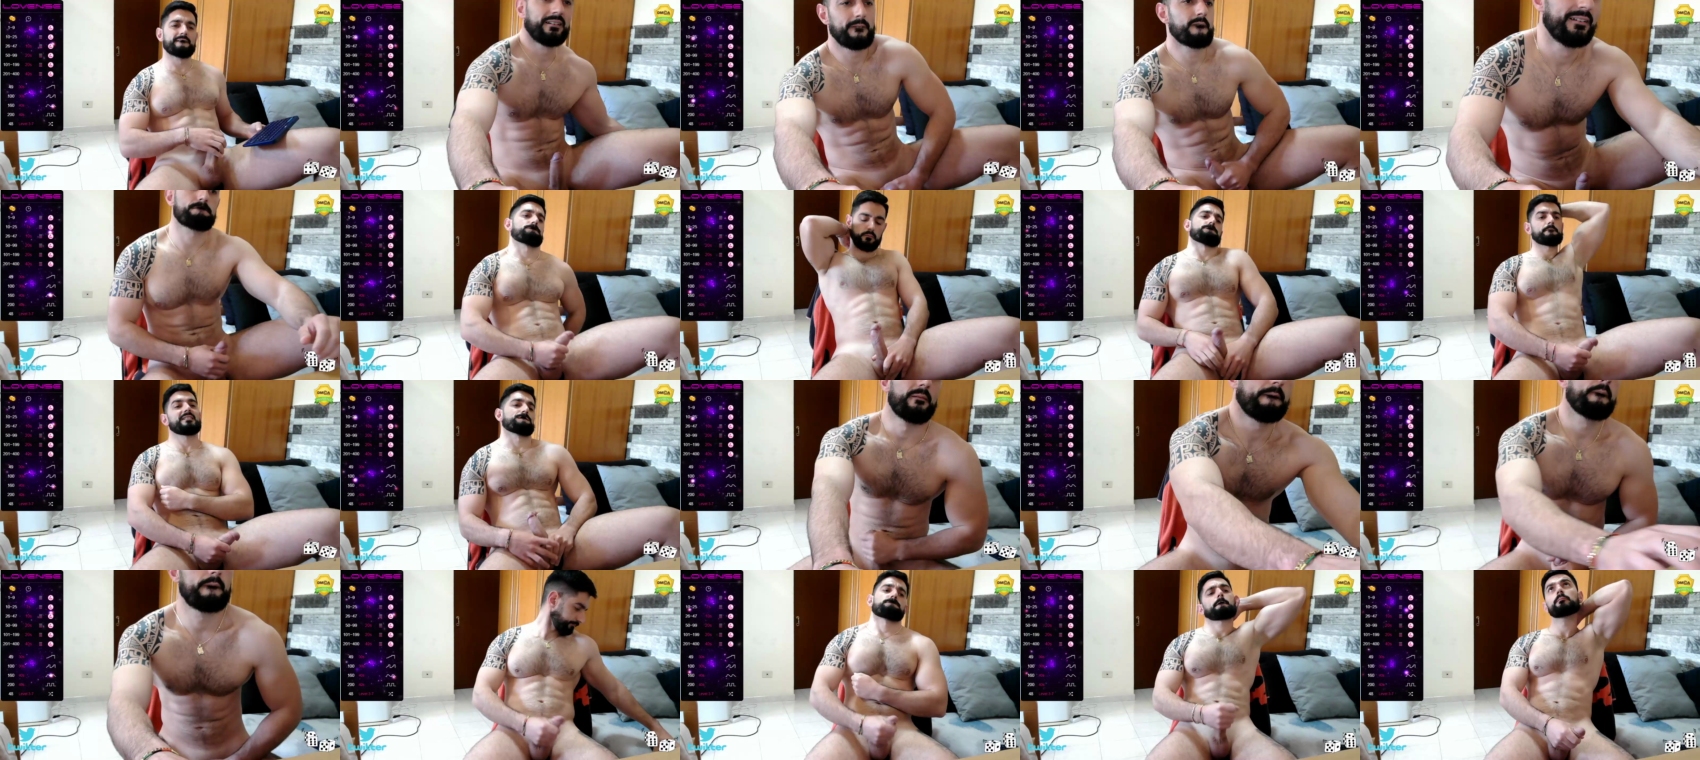 ricky_muscle_1993 fuckme CAM SHOW @ Chaturbate 01-04-2023